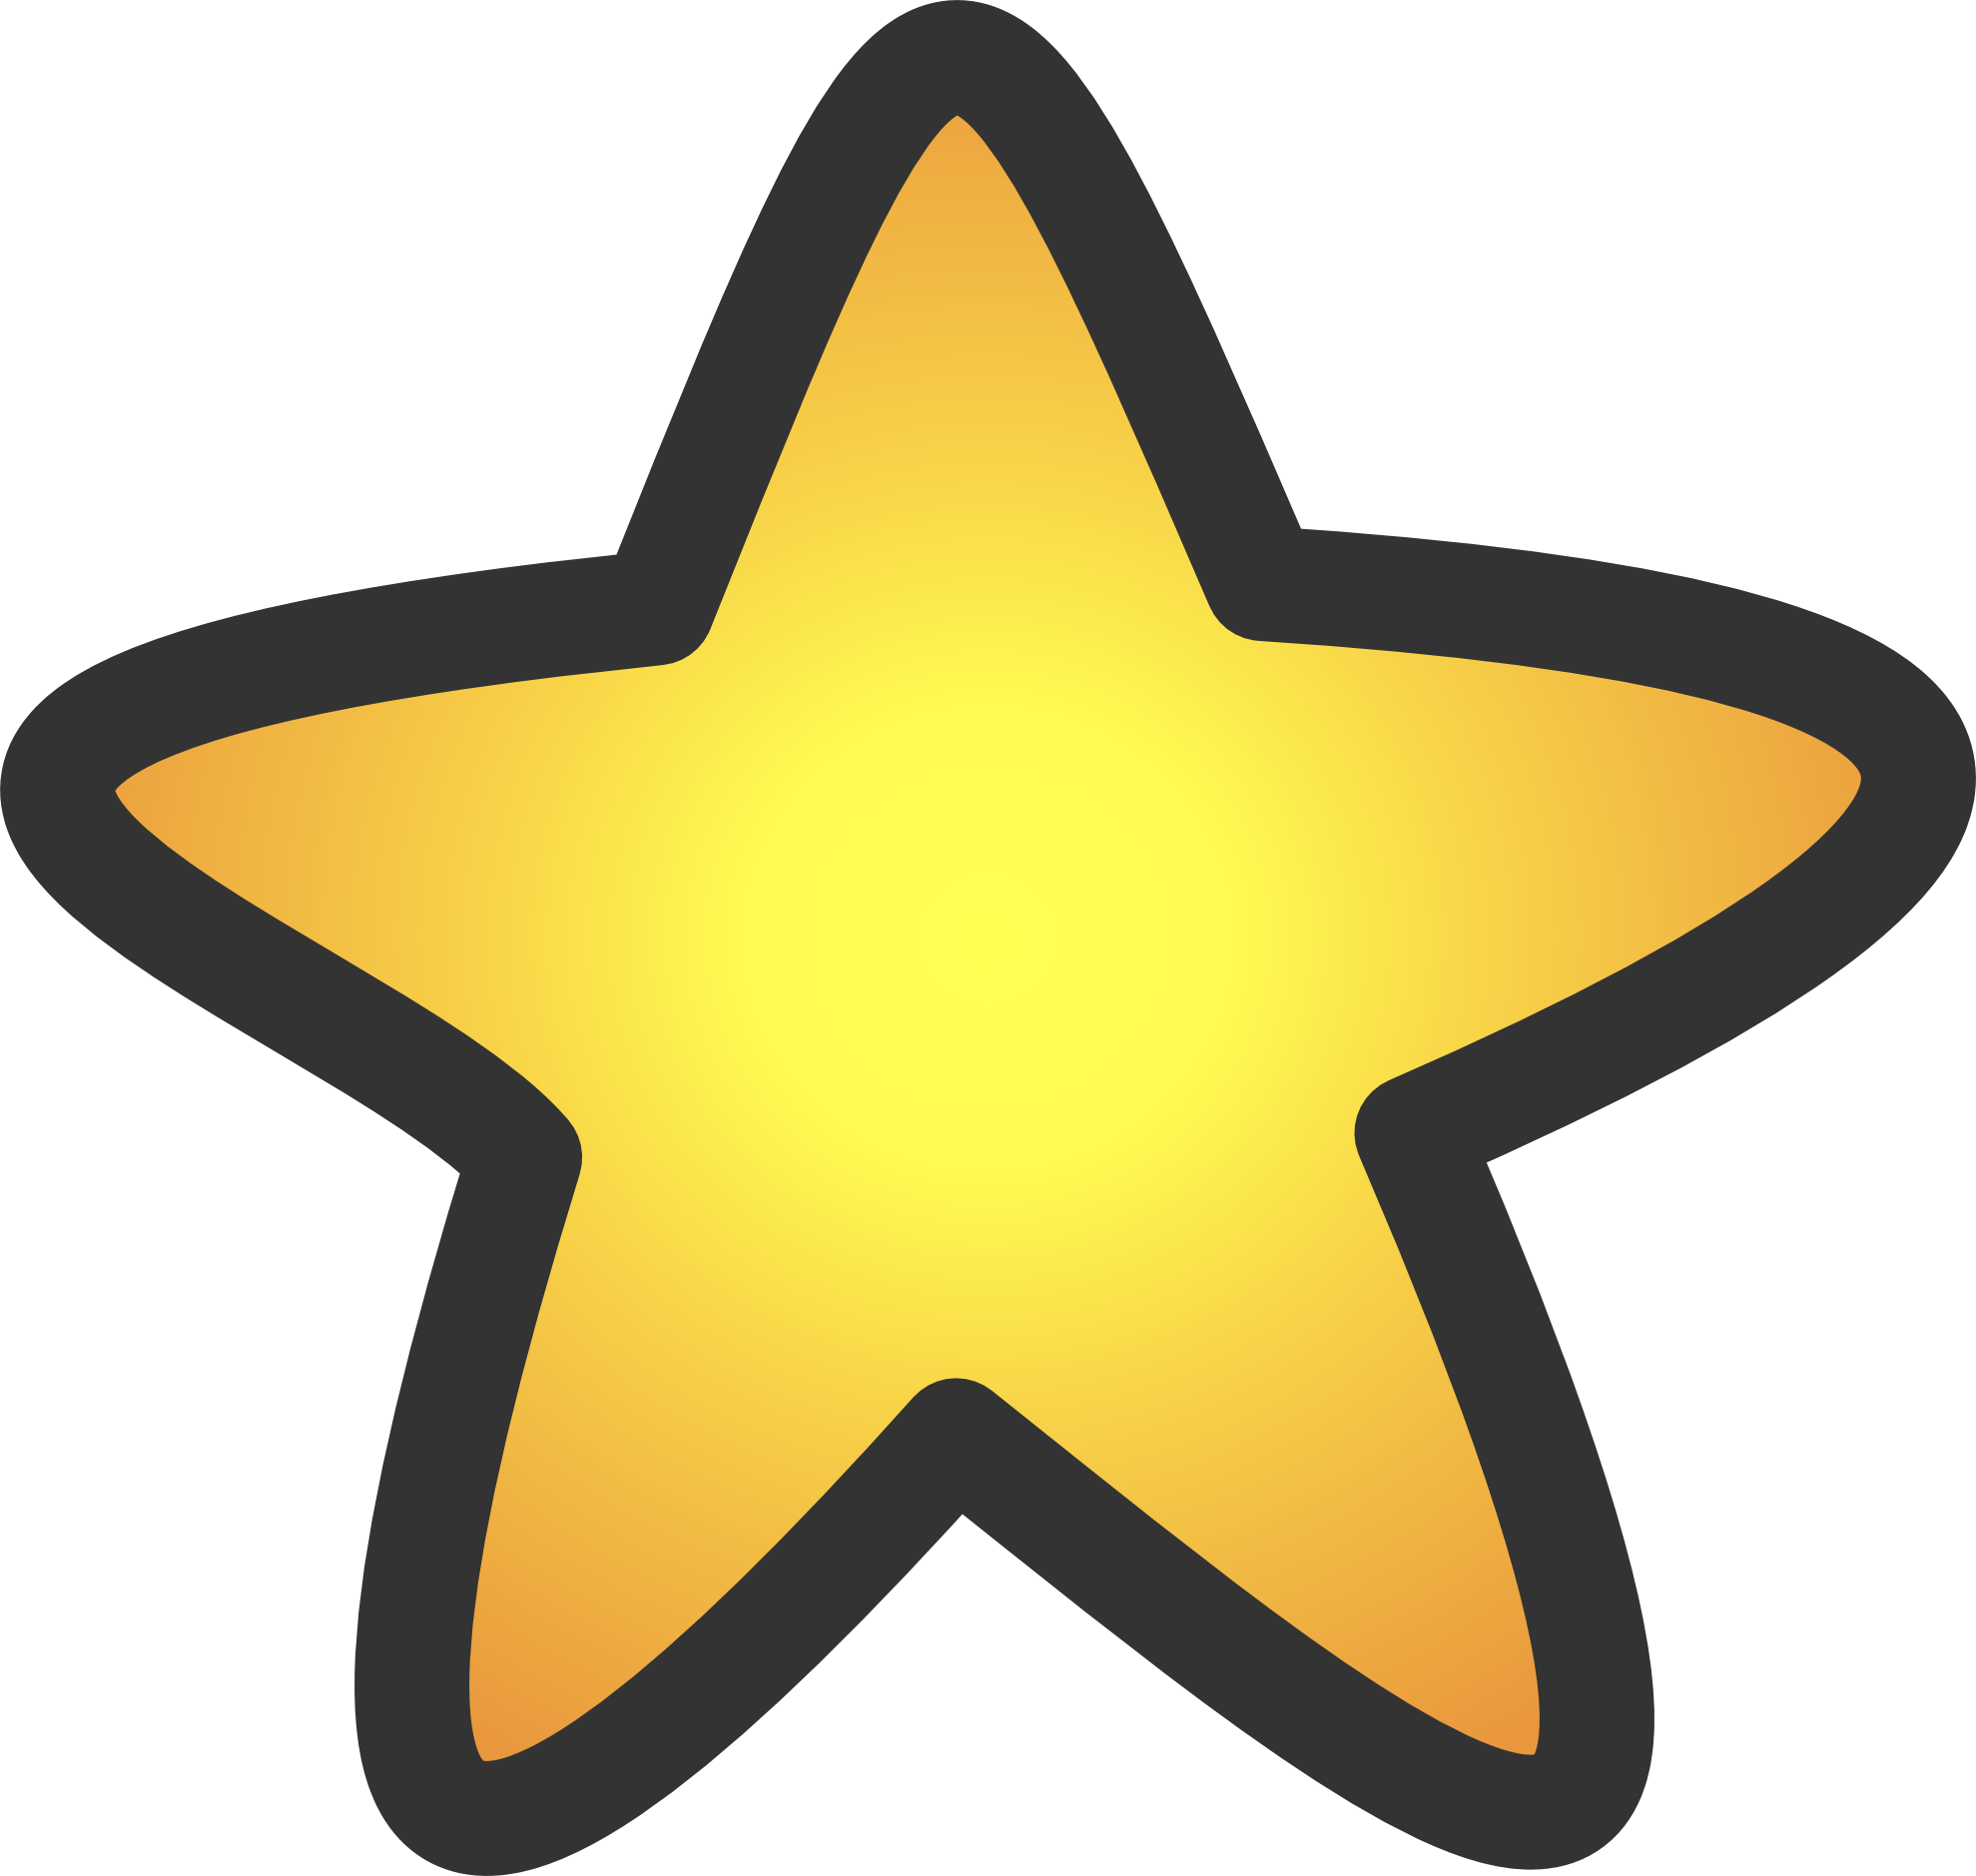 Free Gold Star Image, Download Free Clip Art, Free Clip Art on Clipart